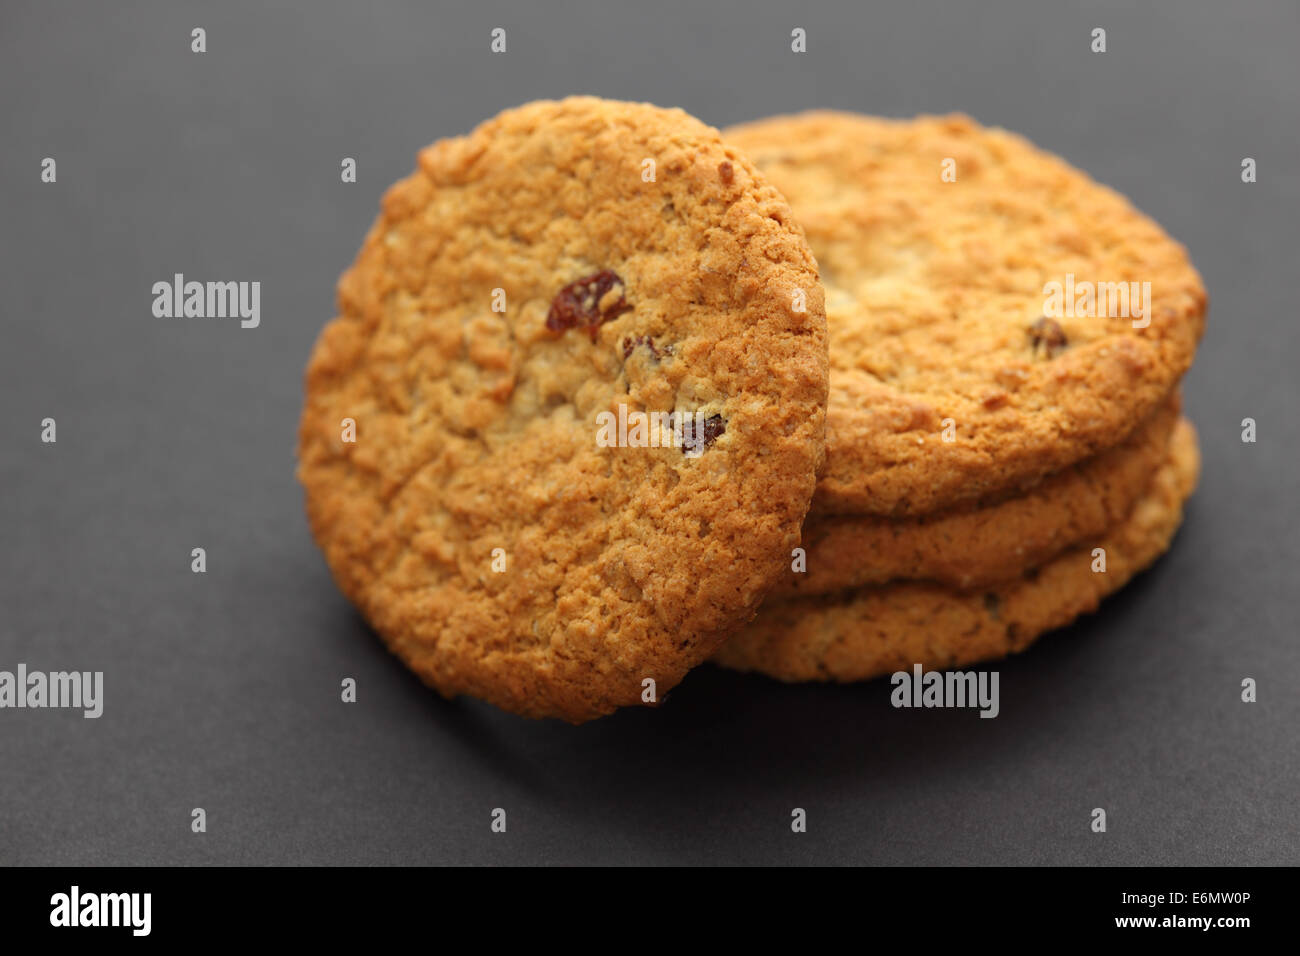 Oatmeal raisin cookies on a black background. Shallow depth of field. Closeup. Stock Photo